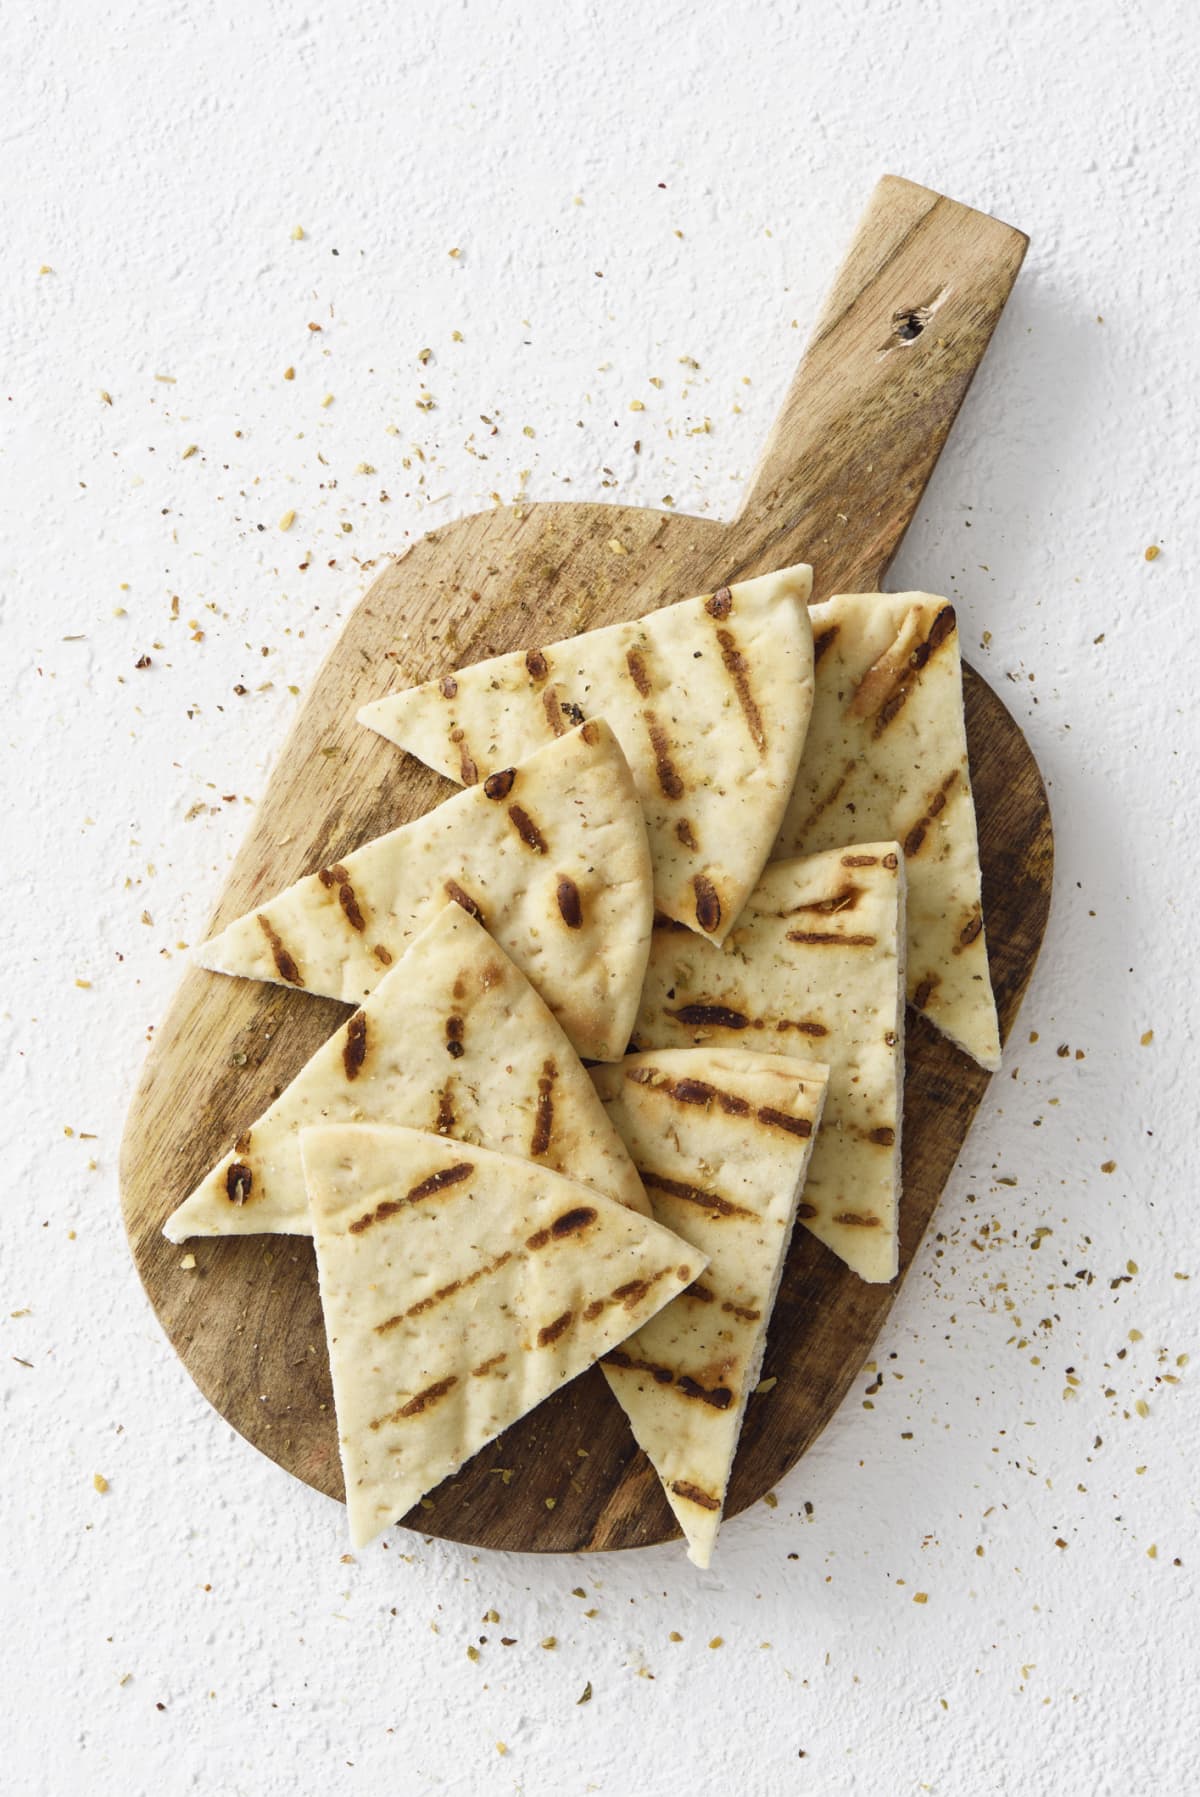 Grilled greek pita bread chips with seasoning on a wooden cutting board